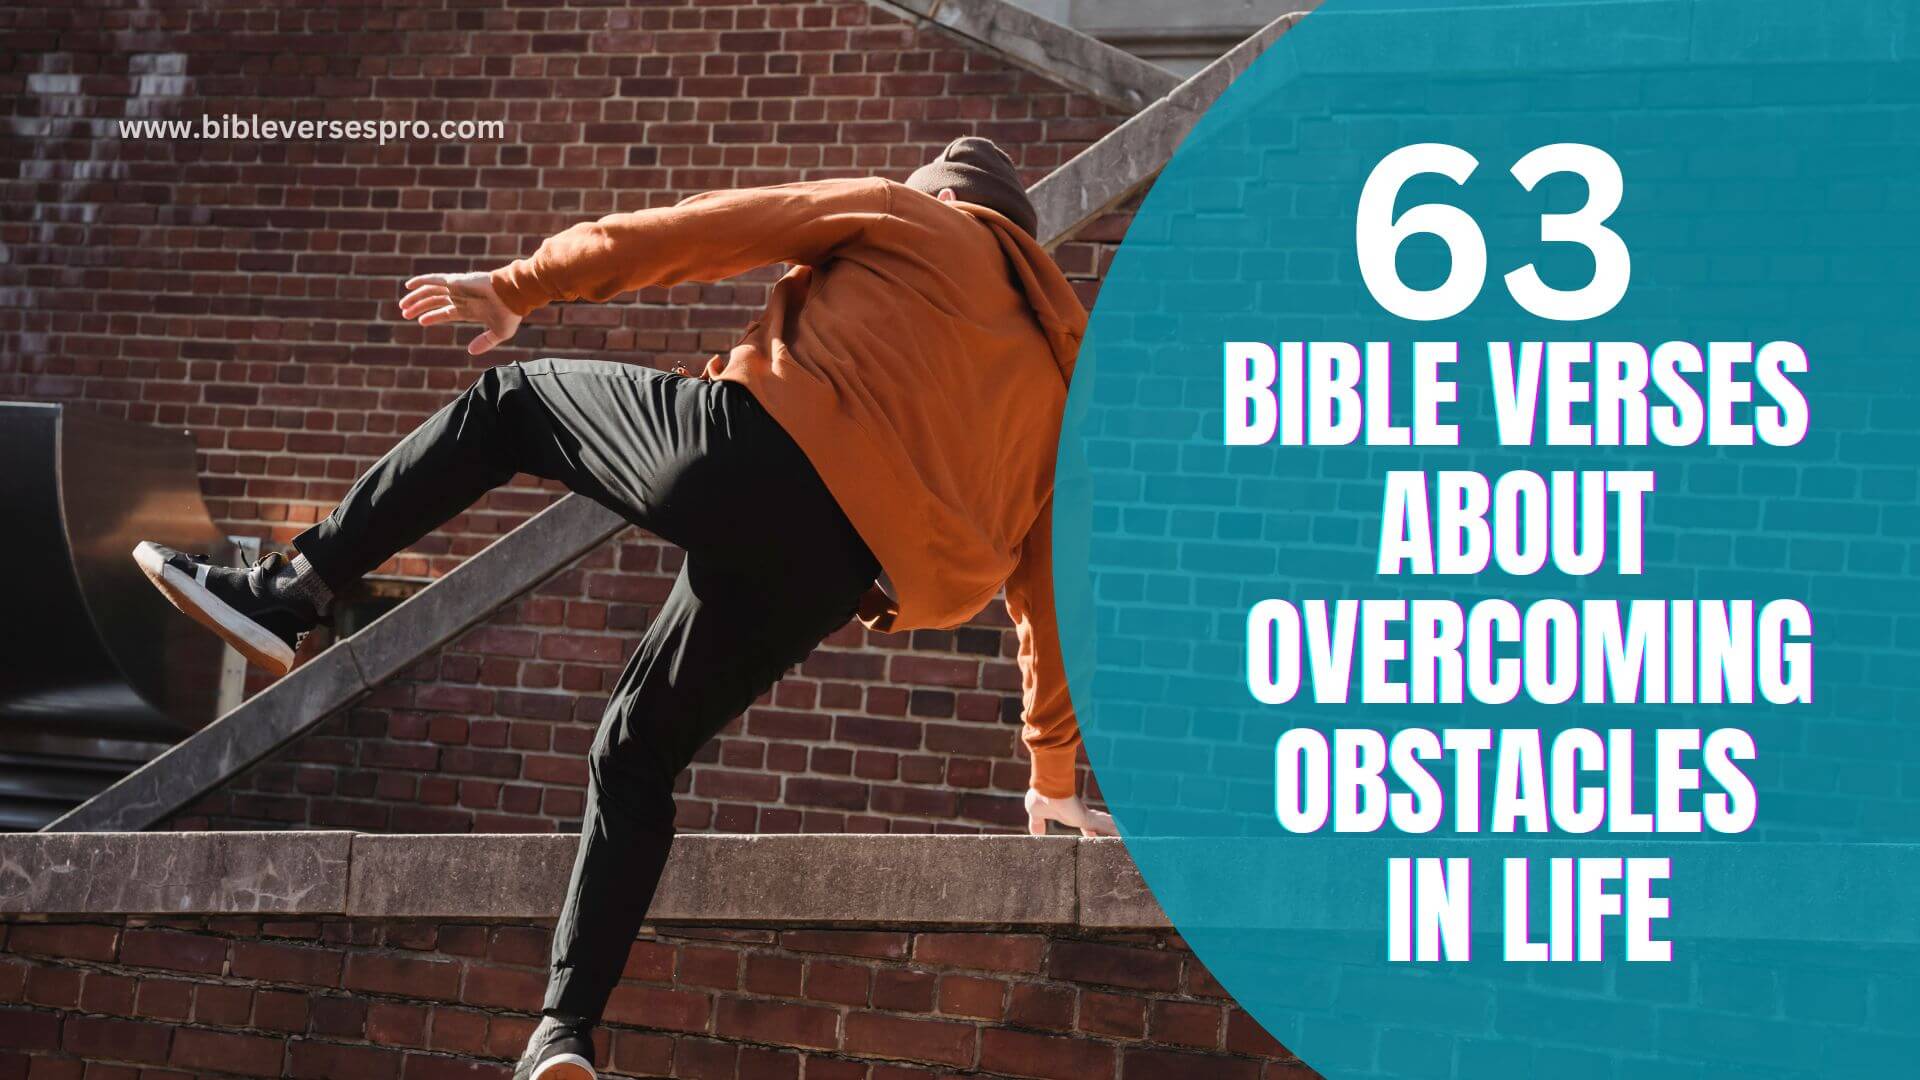 BIBLE VERSES ABOUT OVERCOMING OBSTACLES IN LIFE